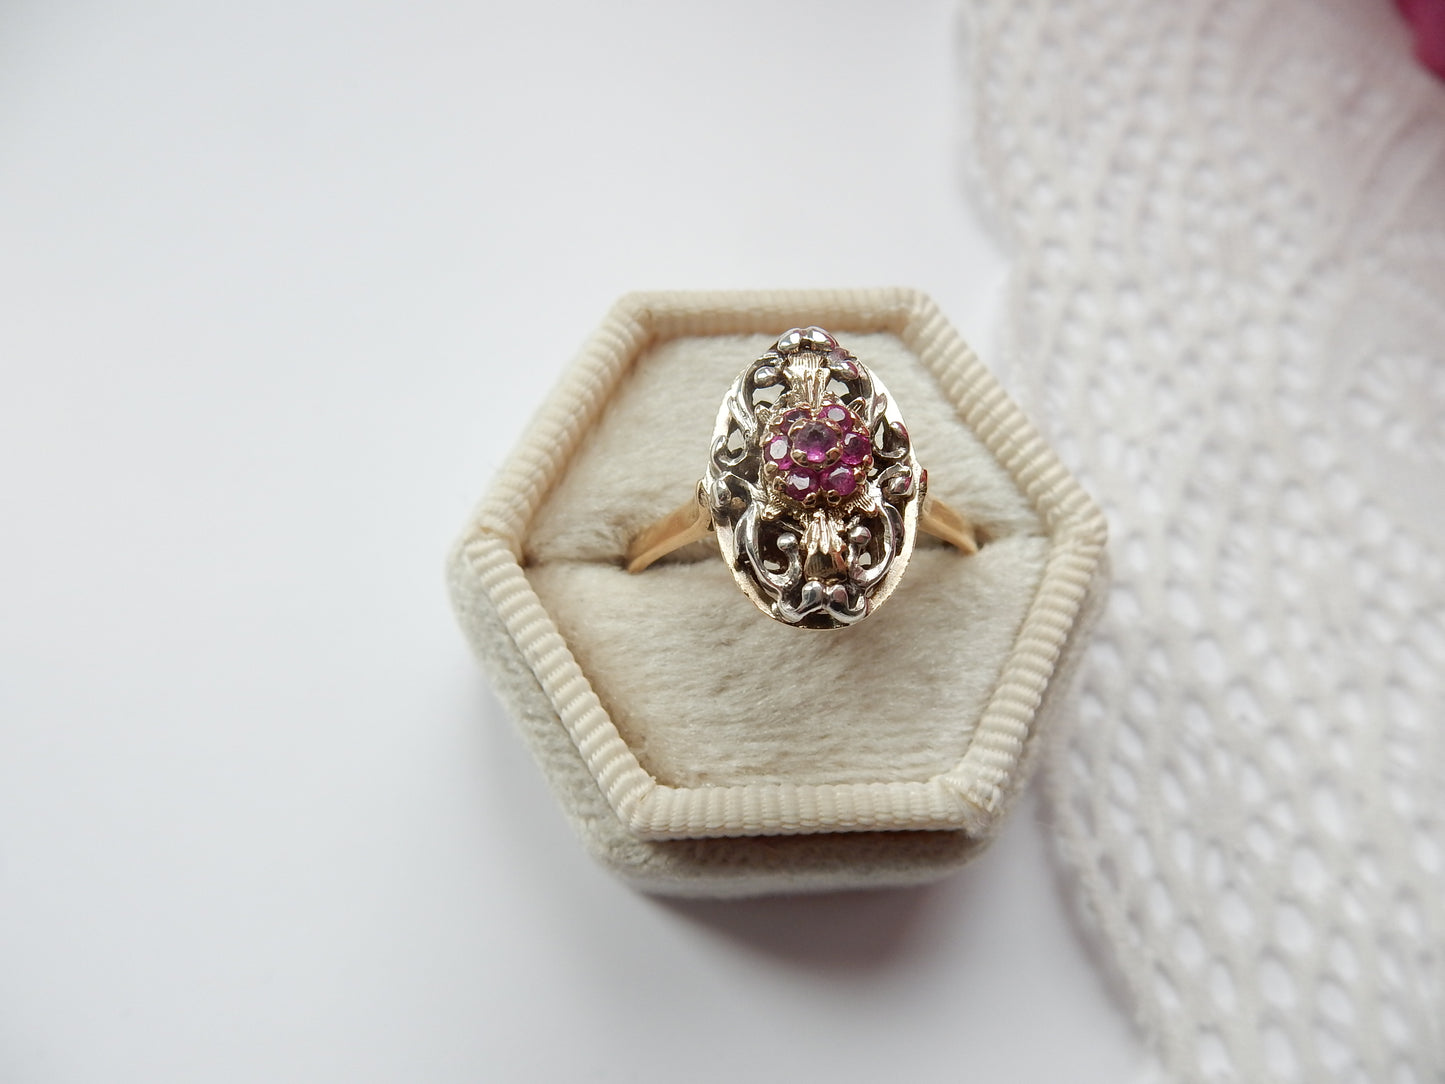 Unusual Antique 9ct White Gold Filigree Ruby Ring US Size 8 3/4 UK S